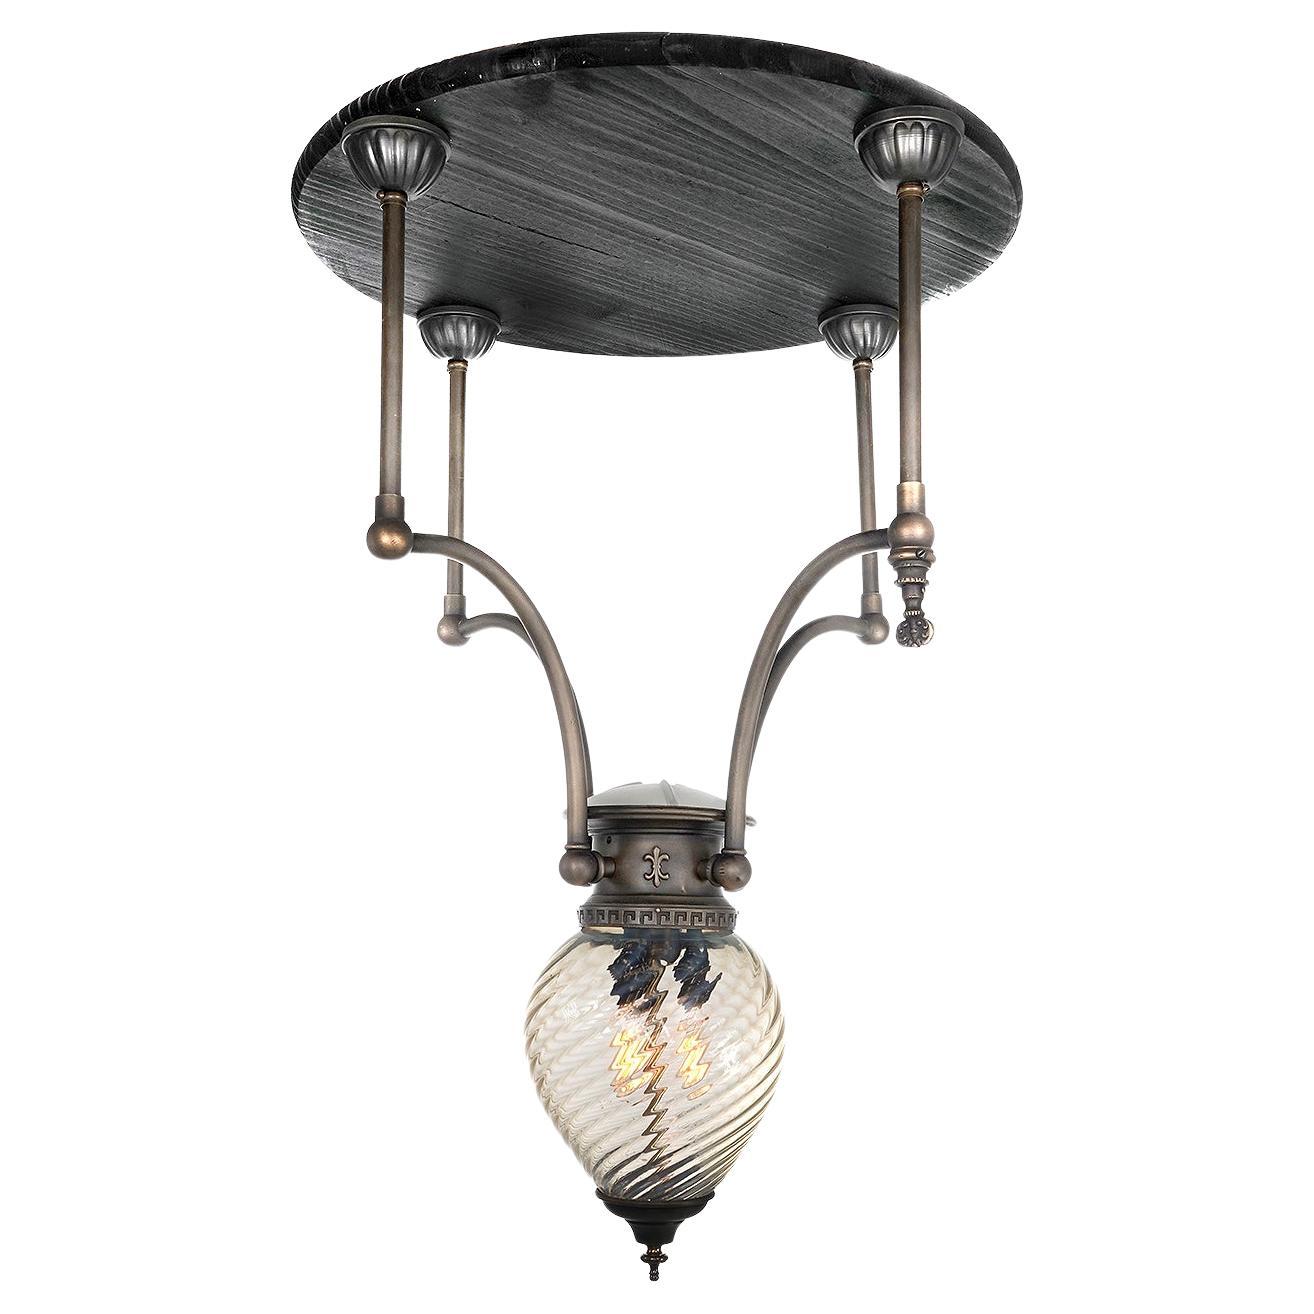 Early Gas Railroad Center Lamp